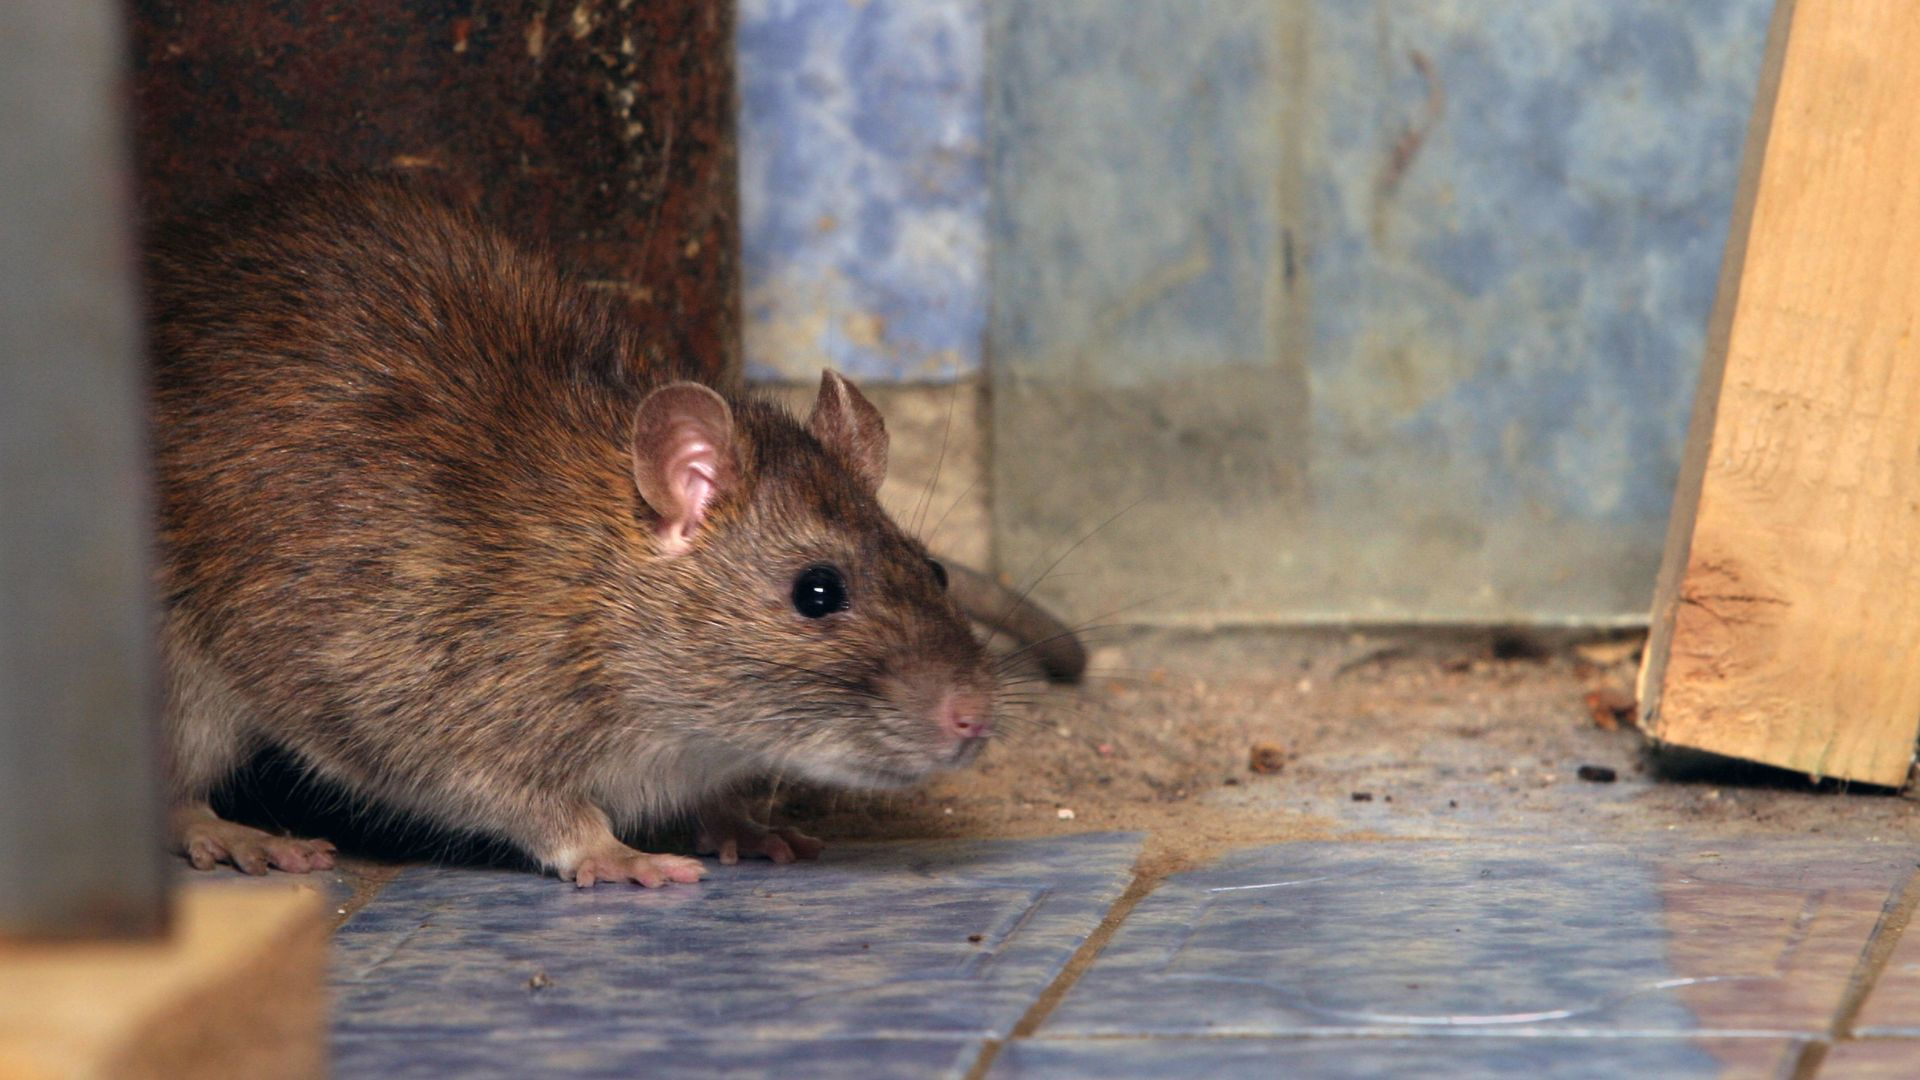 An image of a rat walking near some rat droppings.